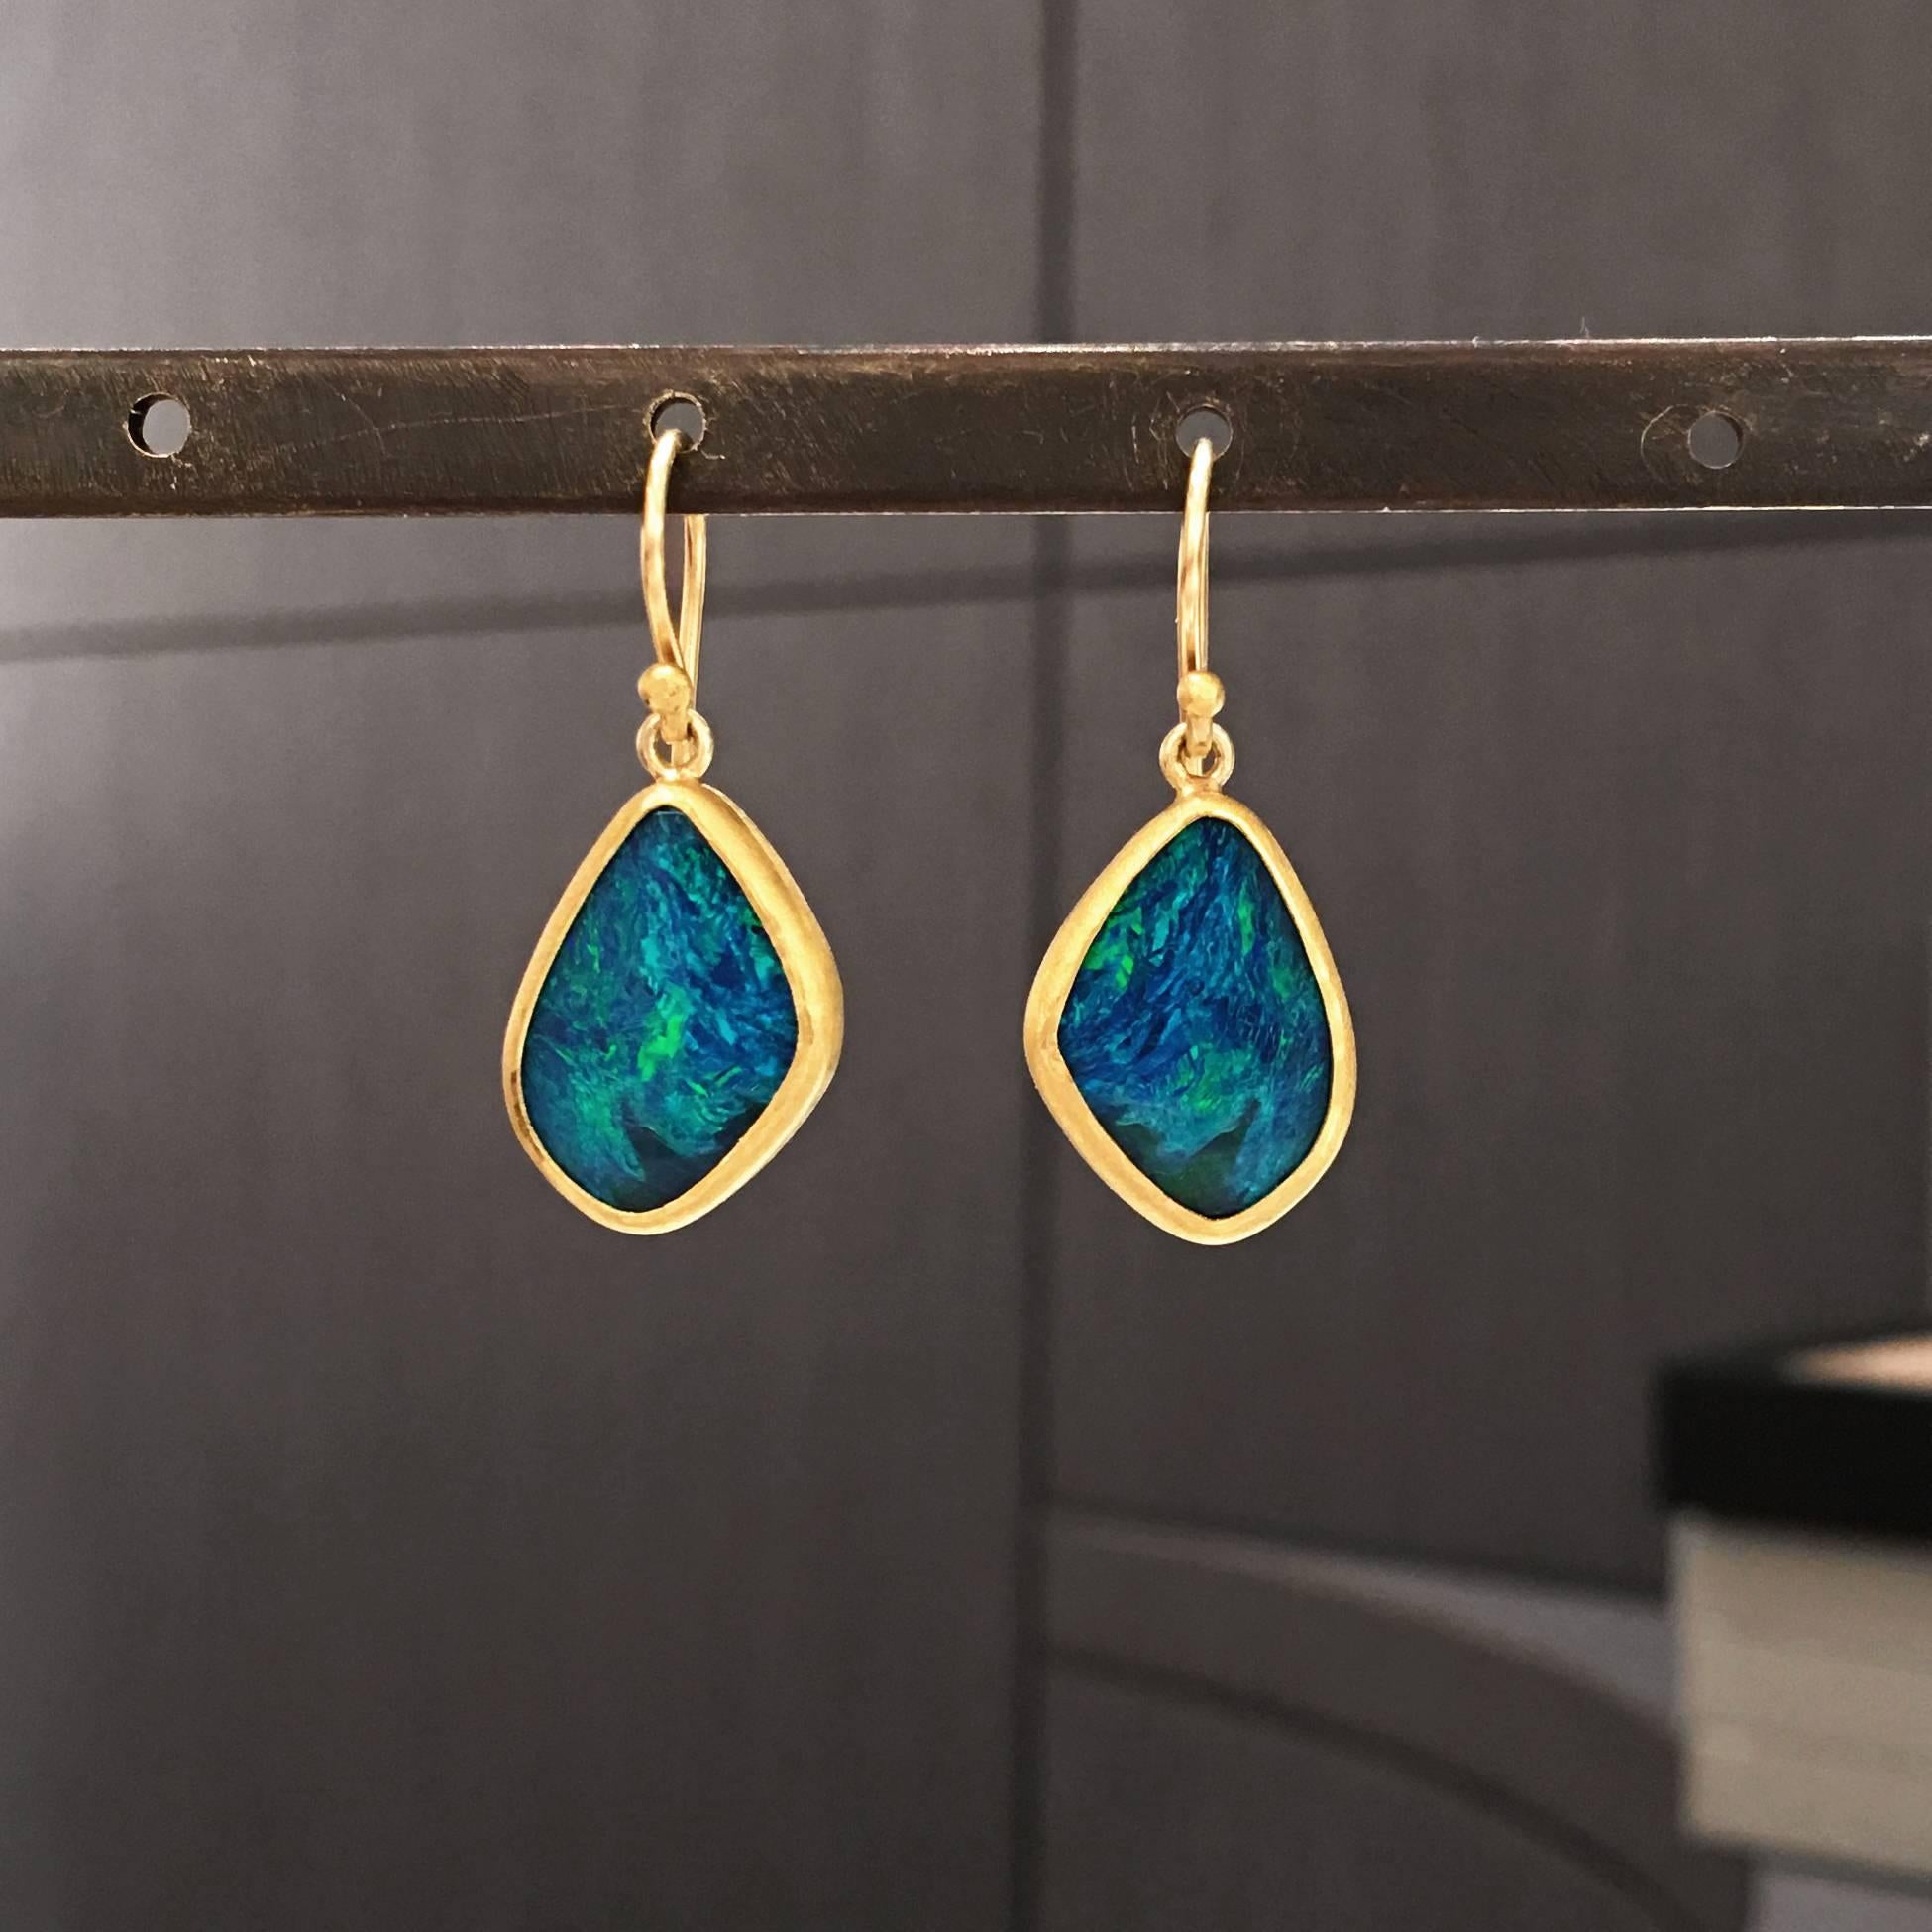 One of a Kind Drop Earrings handcrafted by jewelry artist Petra Class featuring two violet blue opal doublets with lively neon green flash, bezel-set in matte-finished 22k yellow gold on 18k yellow gold ear wires. 

Stamped and Hallmarked - 22 /